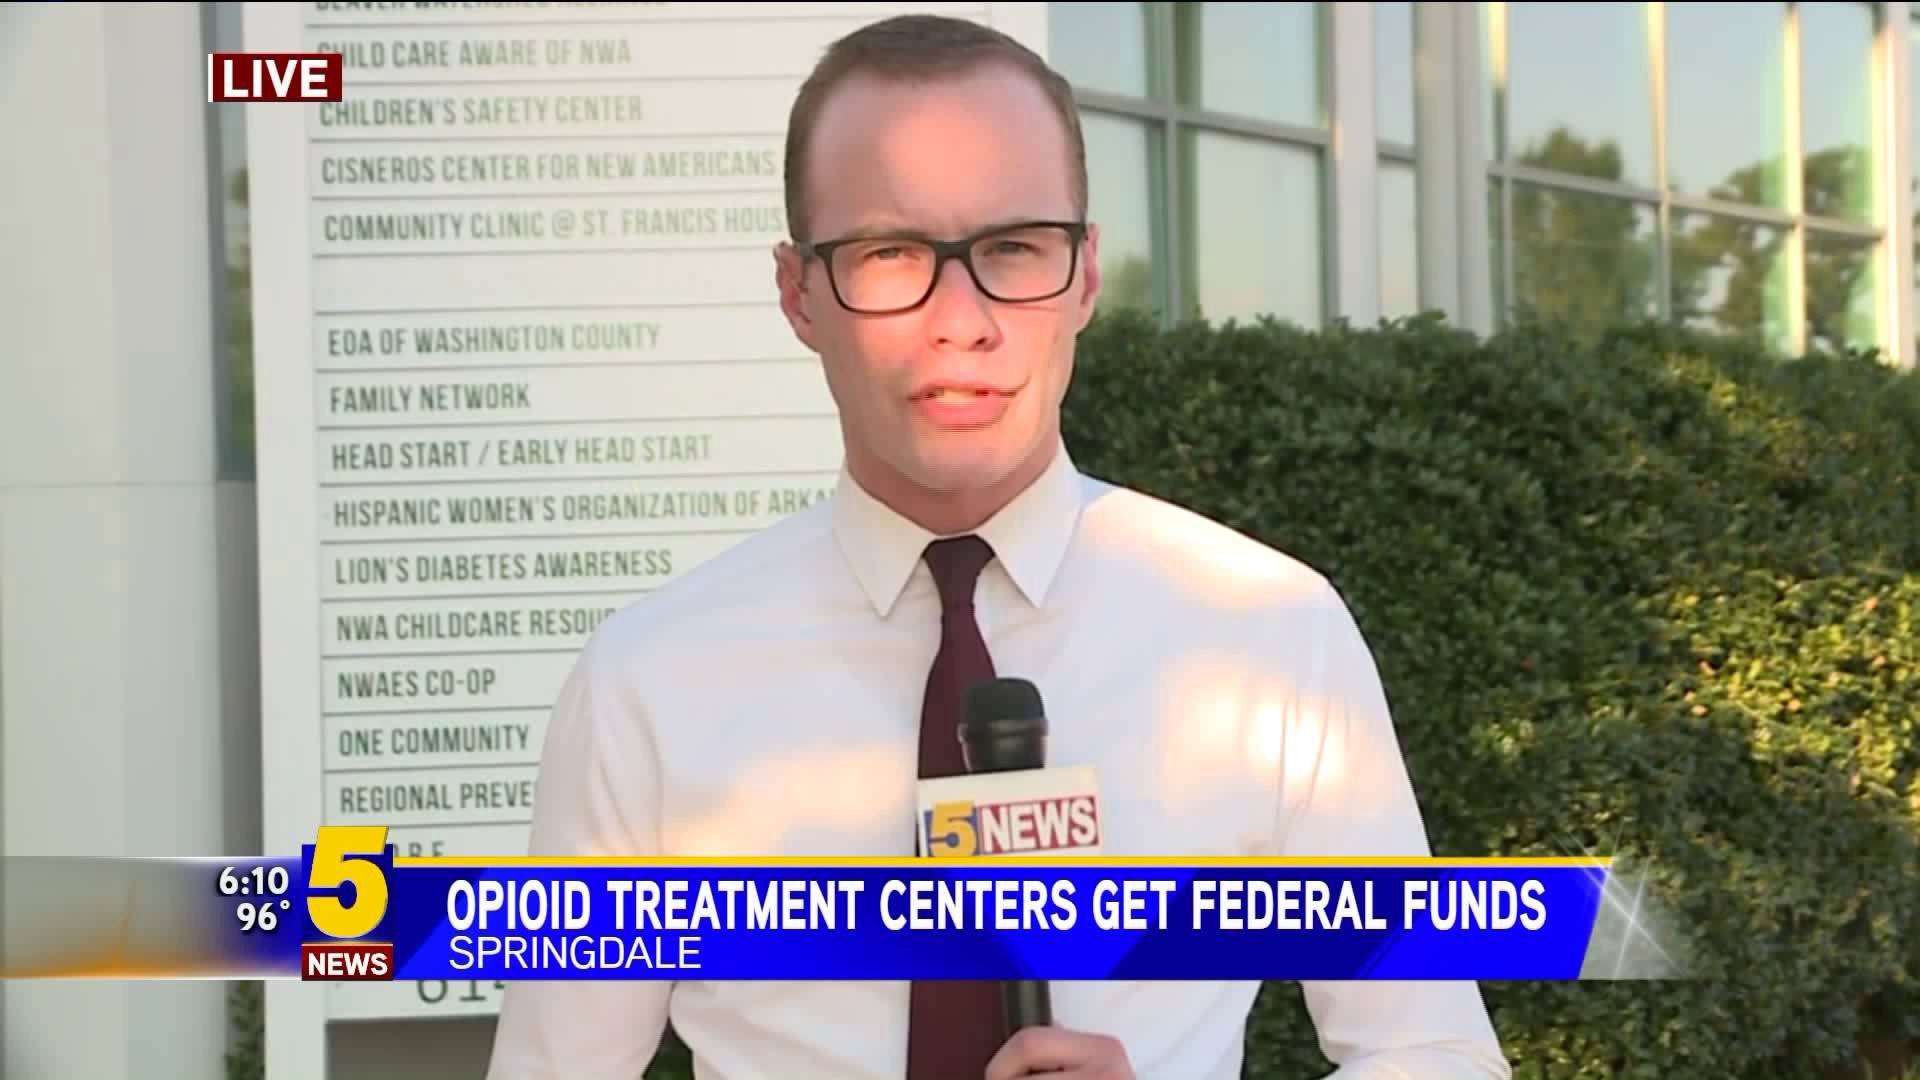 Opioid Treatment Centers Get Federal Funds